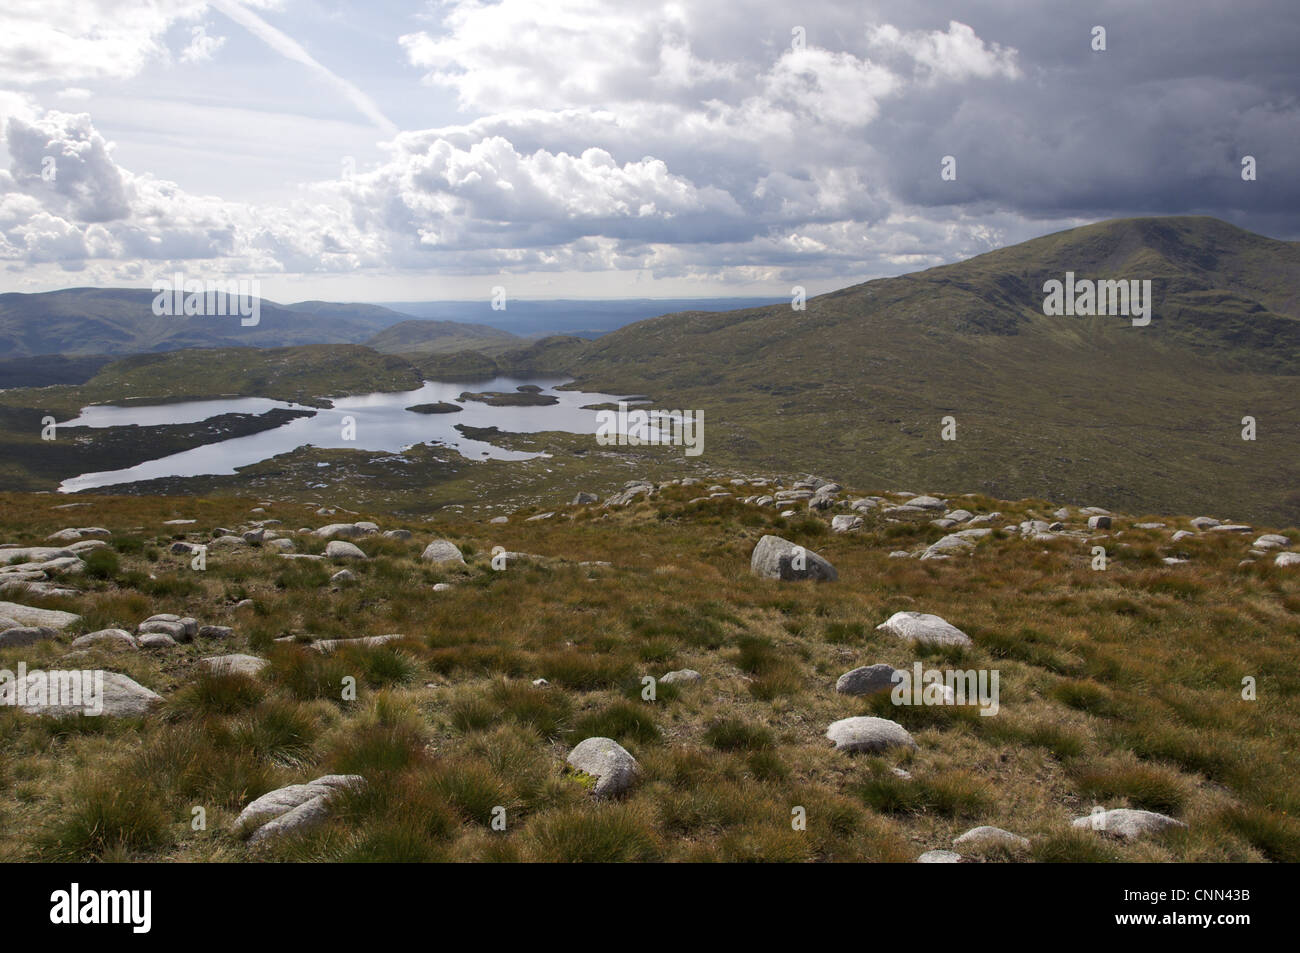 View of upland habitat, Merrick and Loch Enoch from Mullwharcher, Galloway Hills, Dumfries and Galloway, Scotland, august Stock Photo